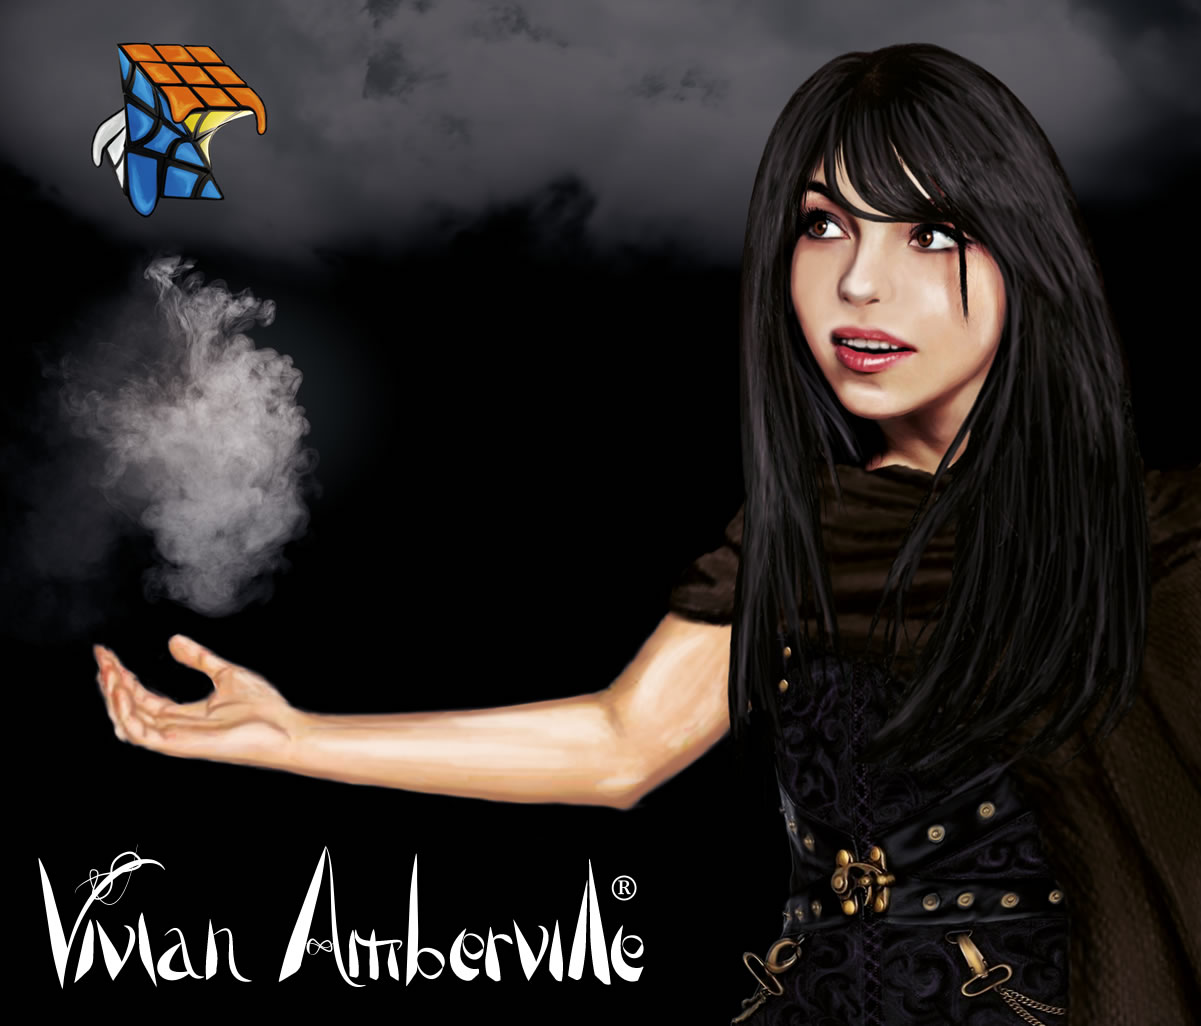 Vivian is the main protagonist of the Vivian Amberville fantasy book franchise